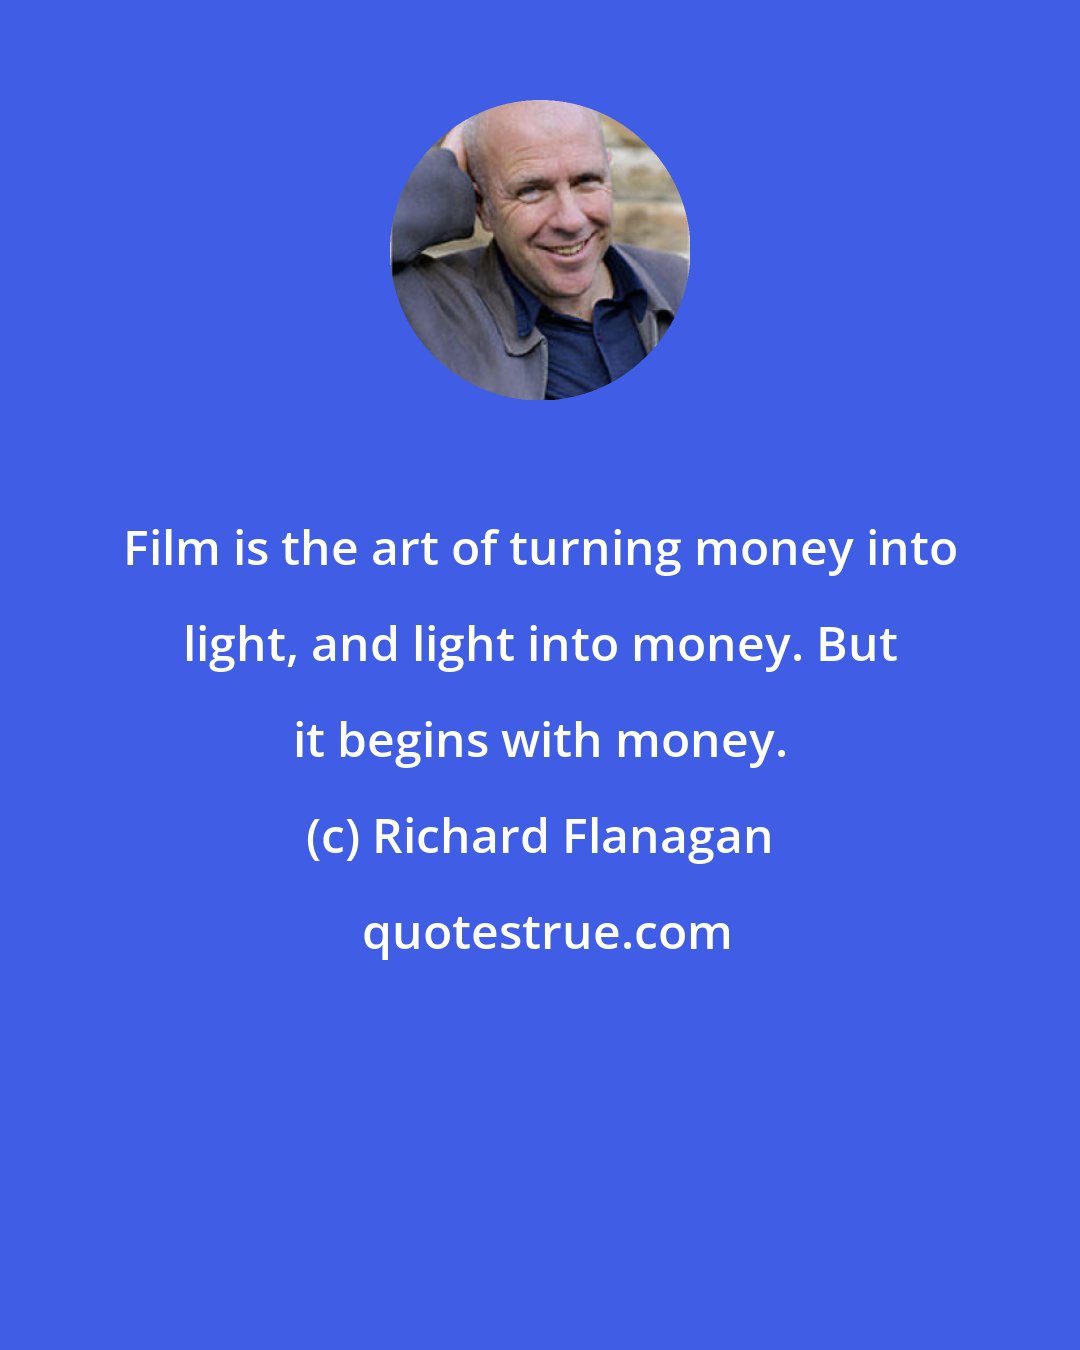 Richard Flanagan: Film is the art of turning money into light, and light into money. But it begins with money.